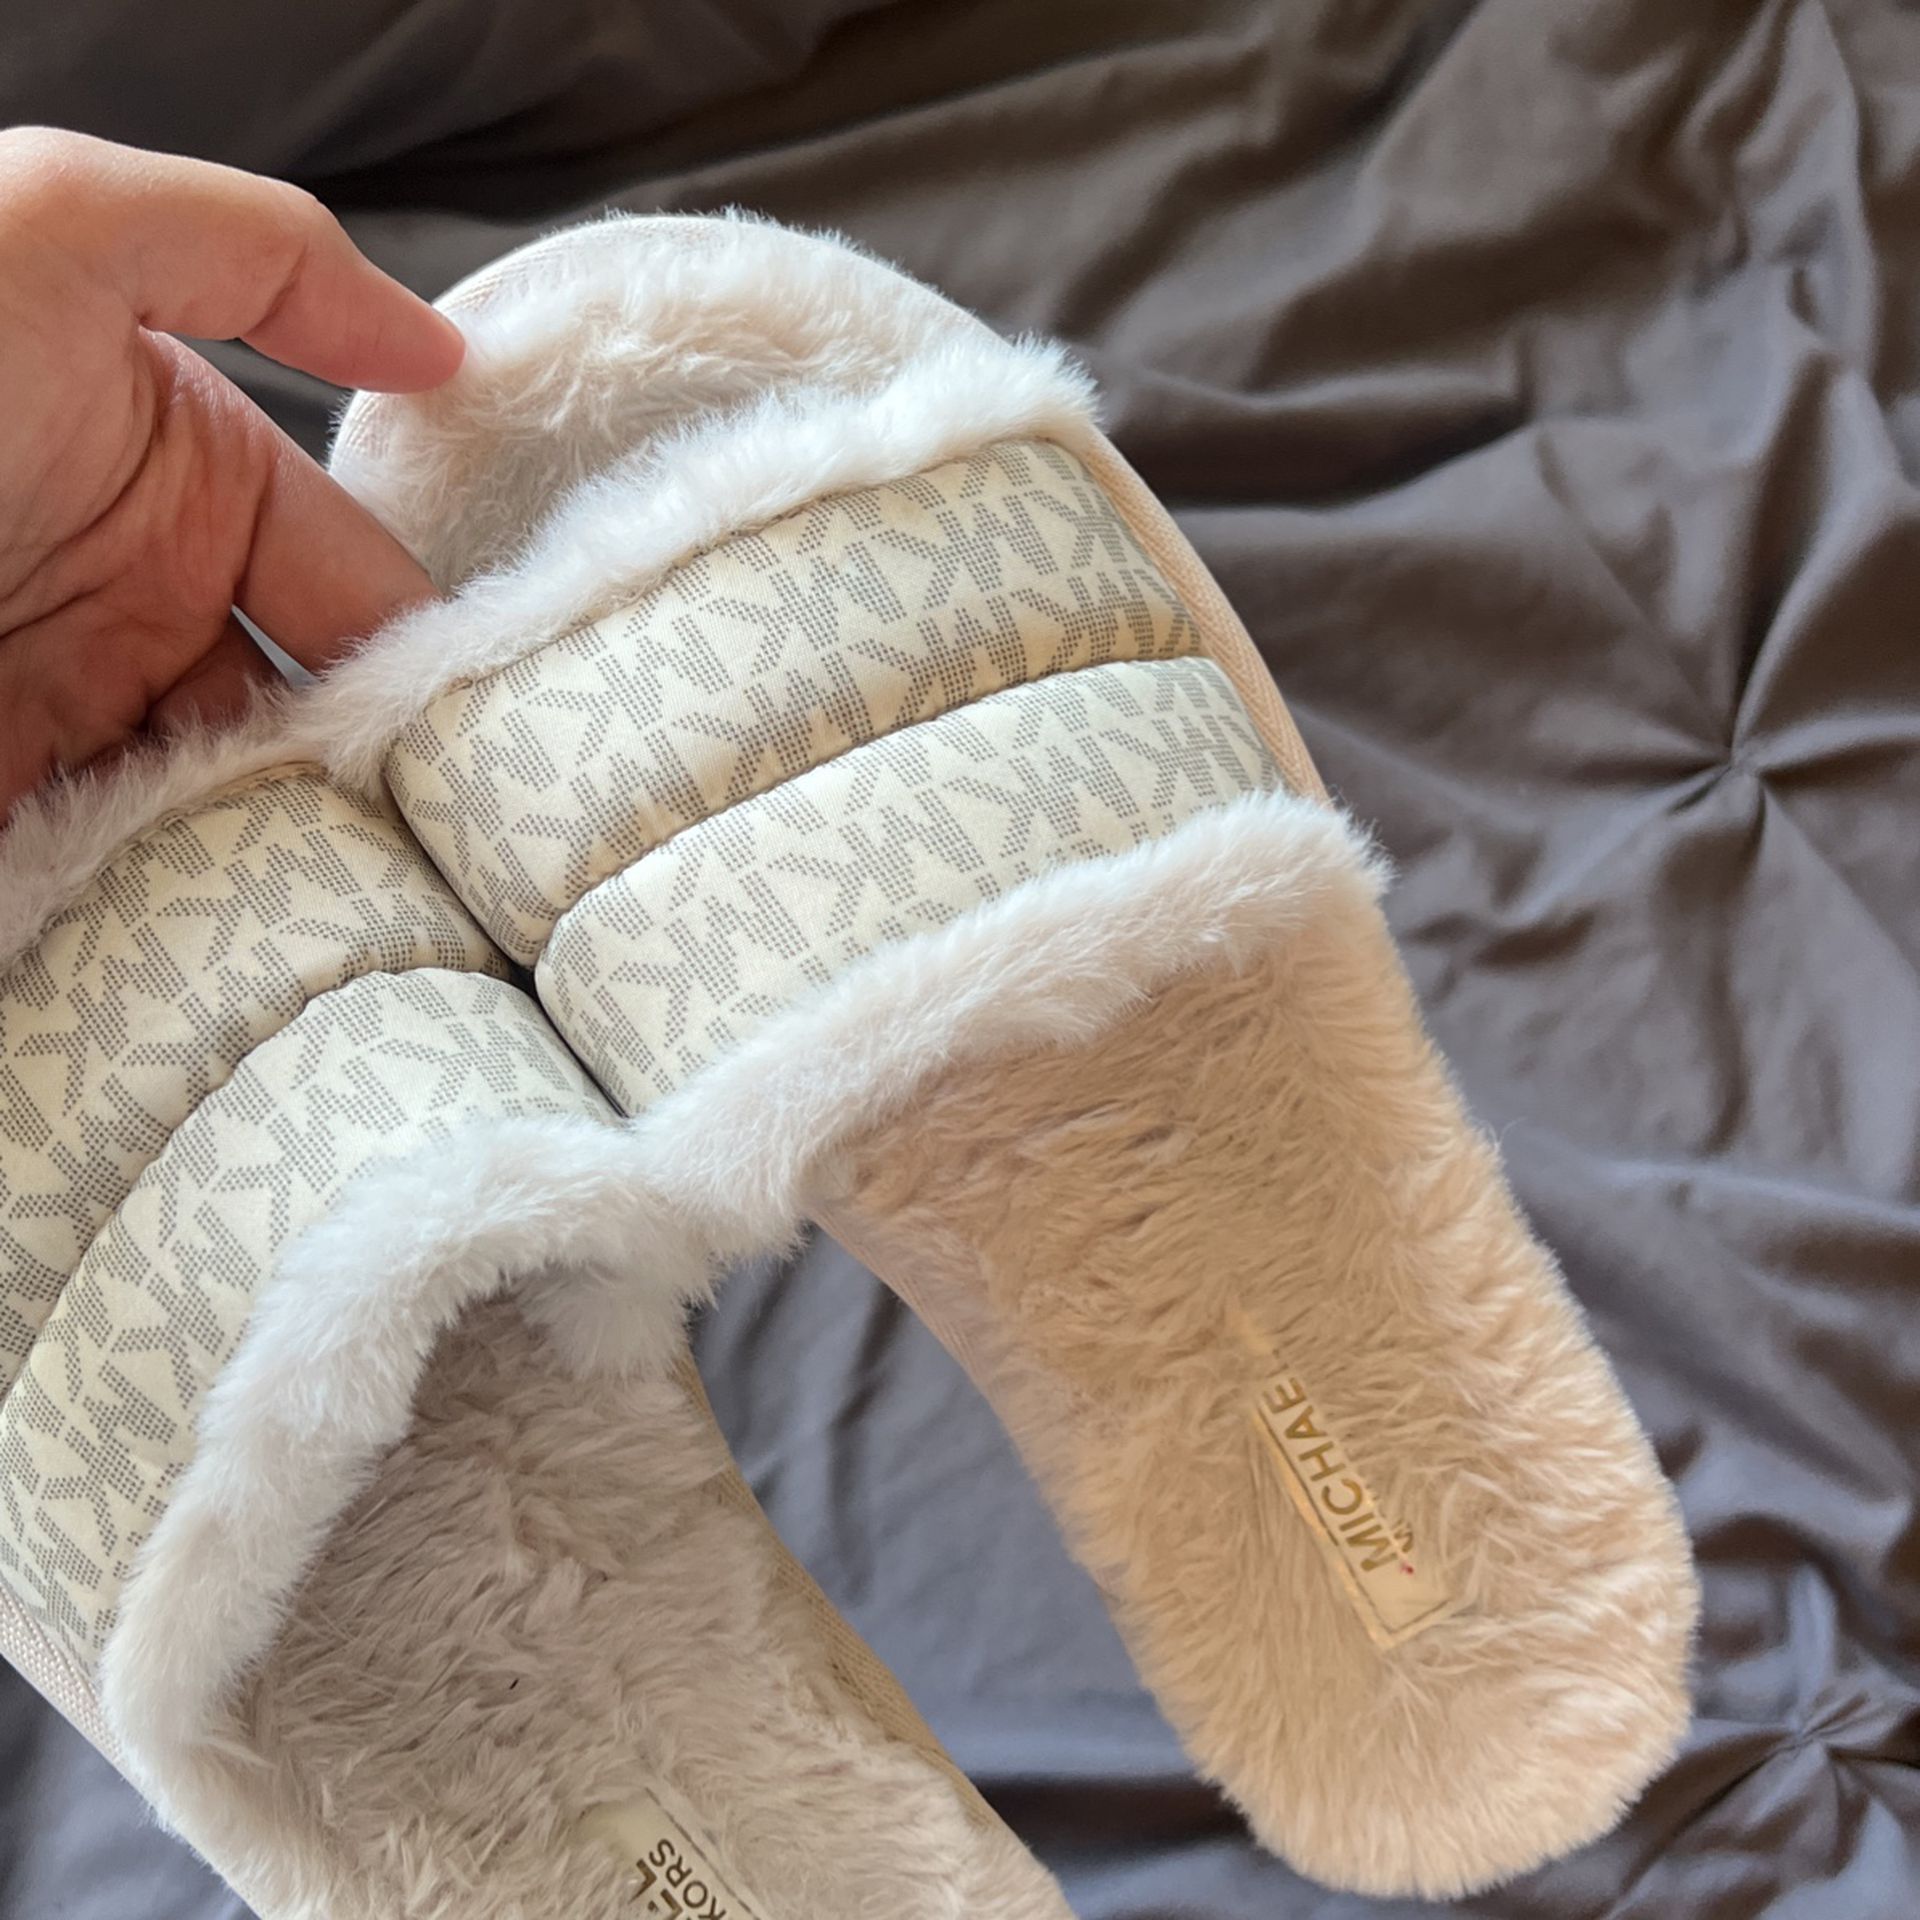 Micheal Kors Slides Slippers for Sale in Phoenix, AZ - OfferUp